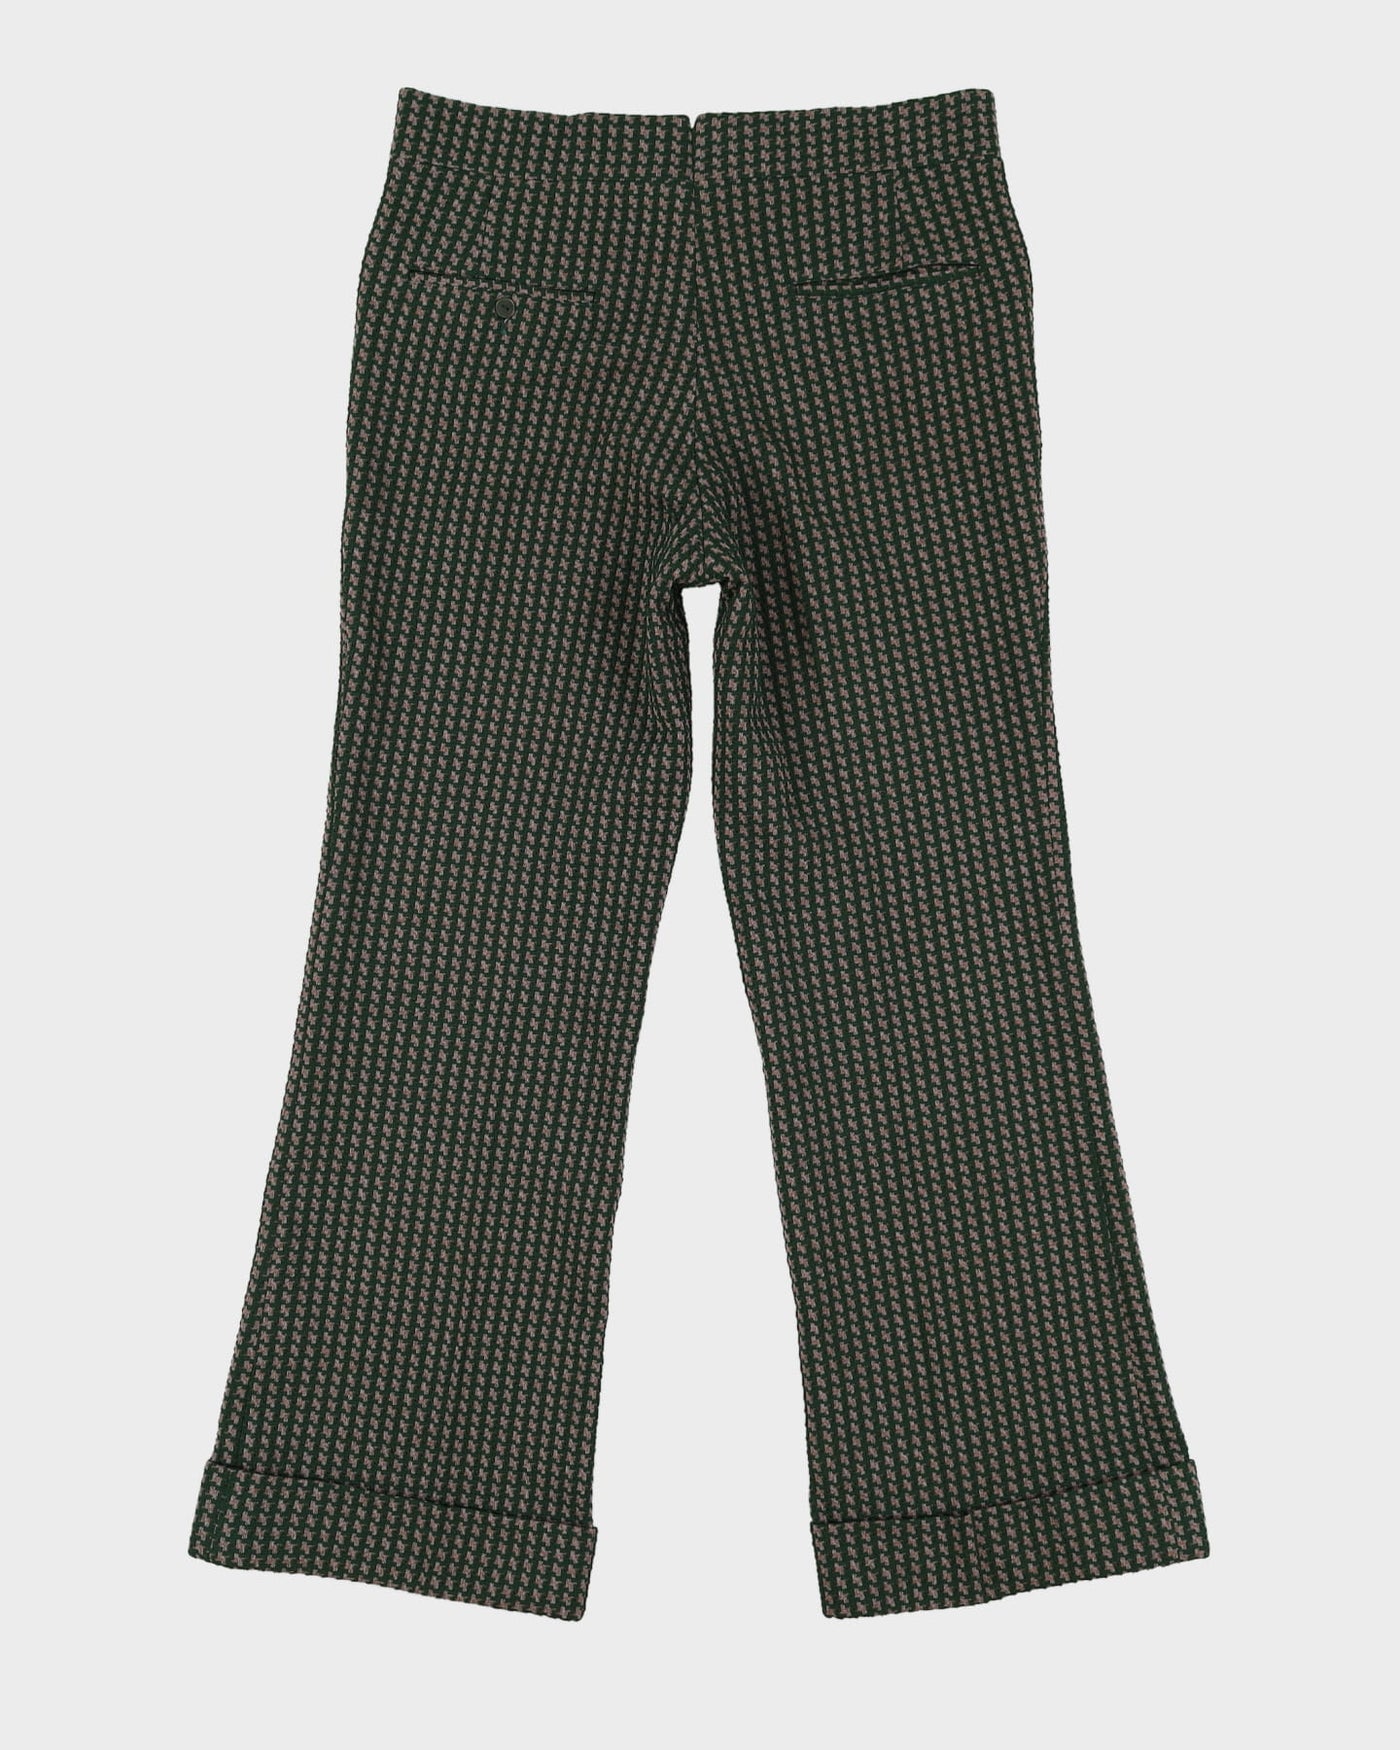 80s Green Houndstooth Patterned Trousers - W34 L31